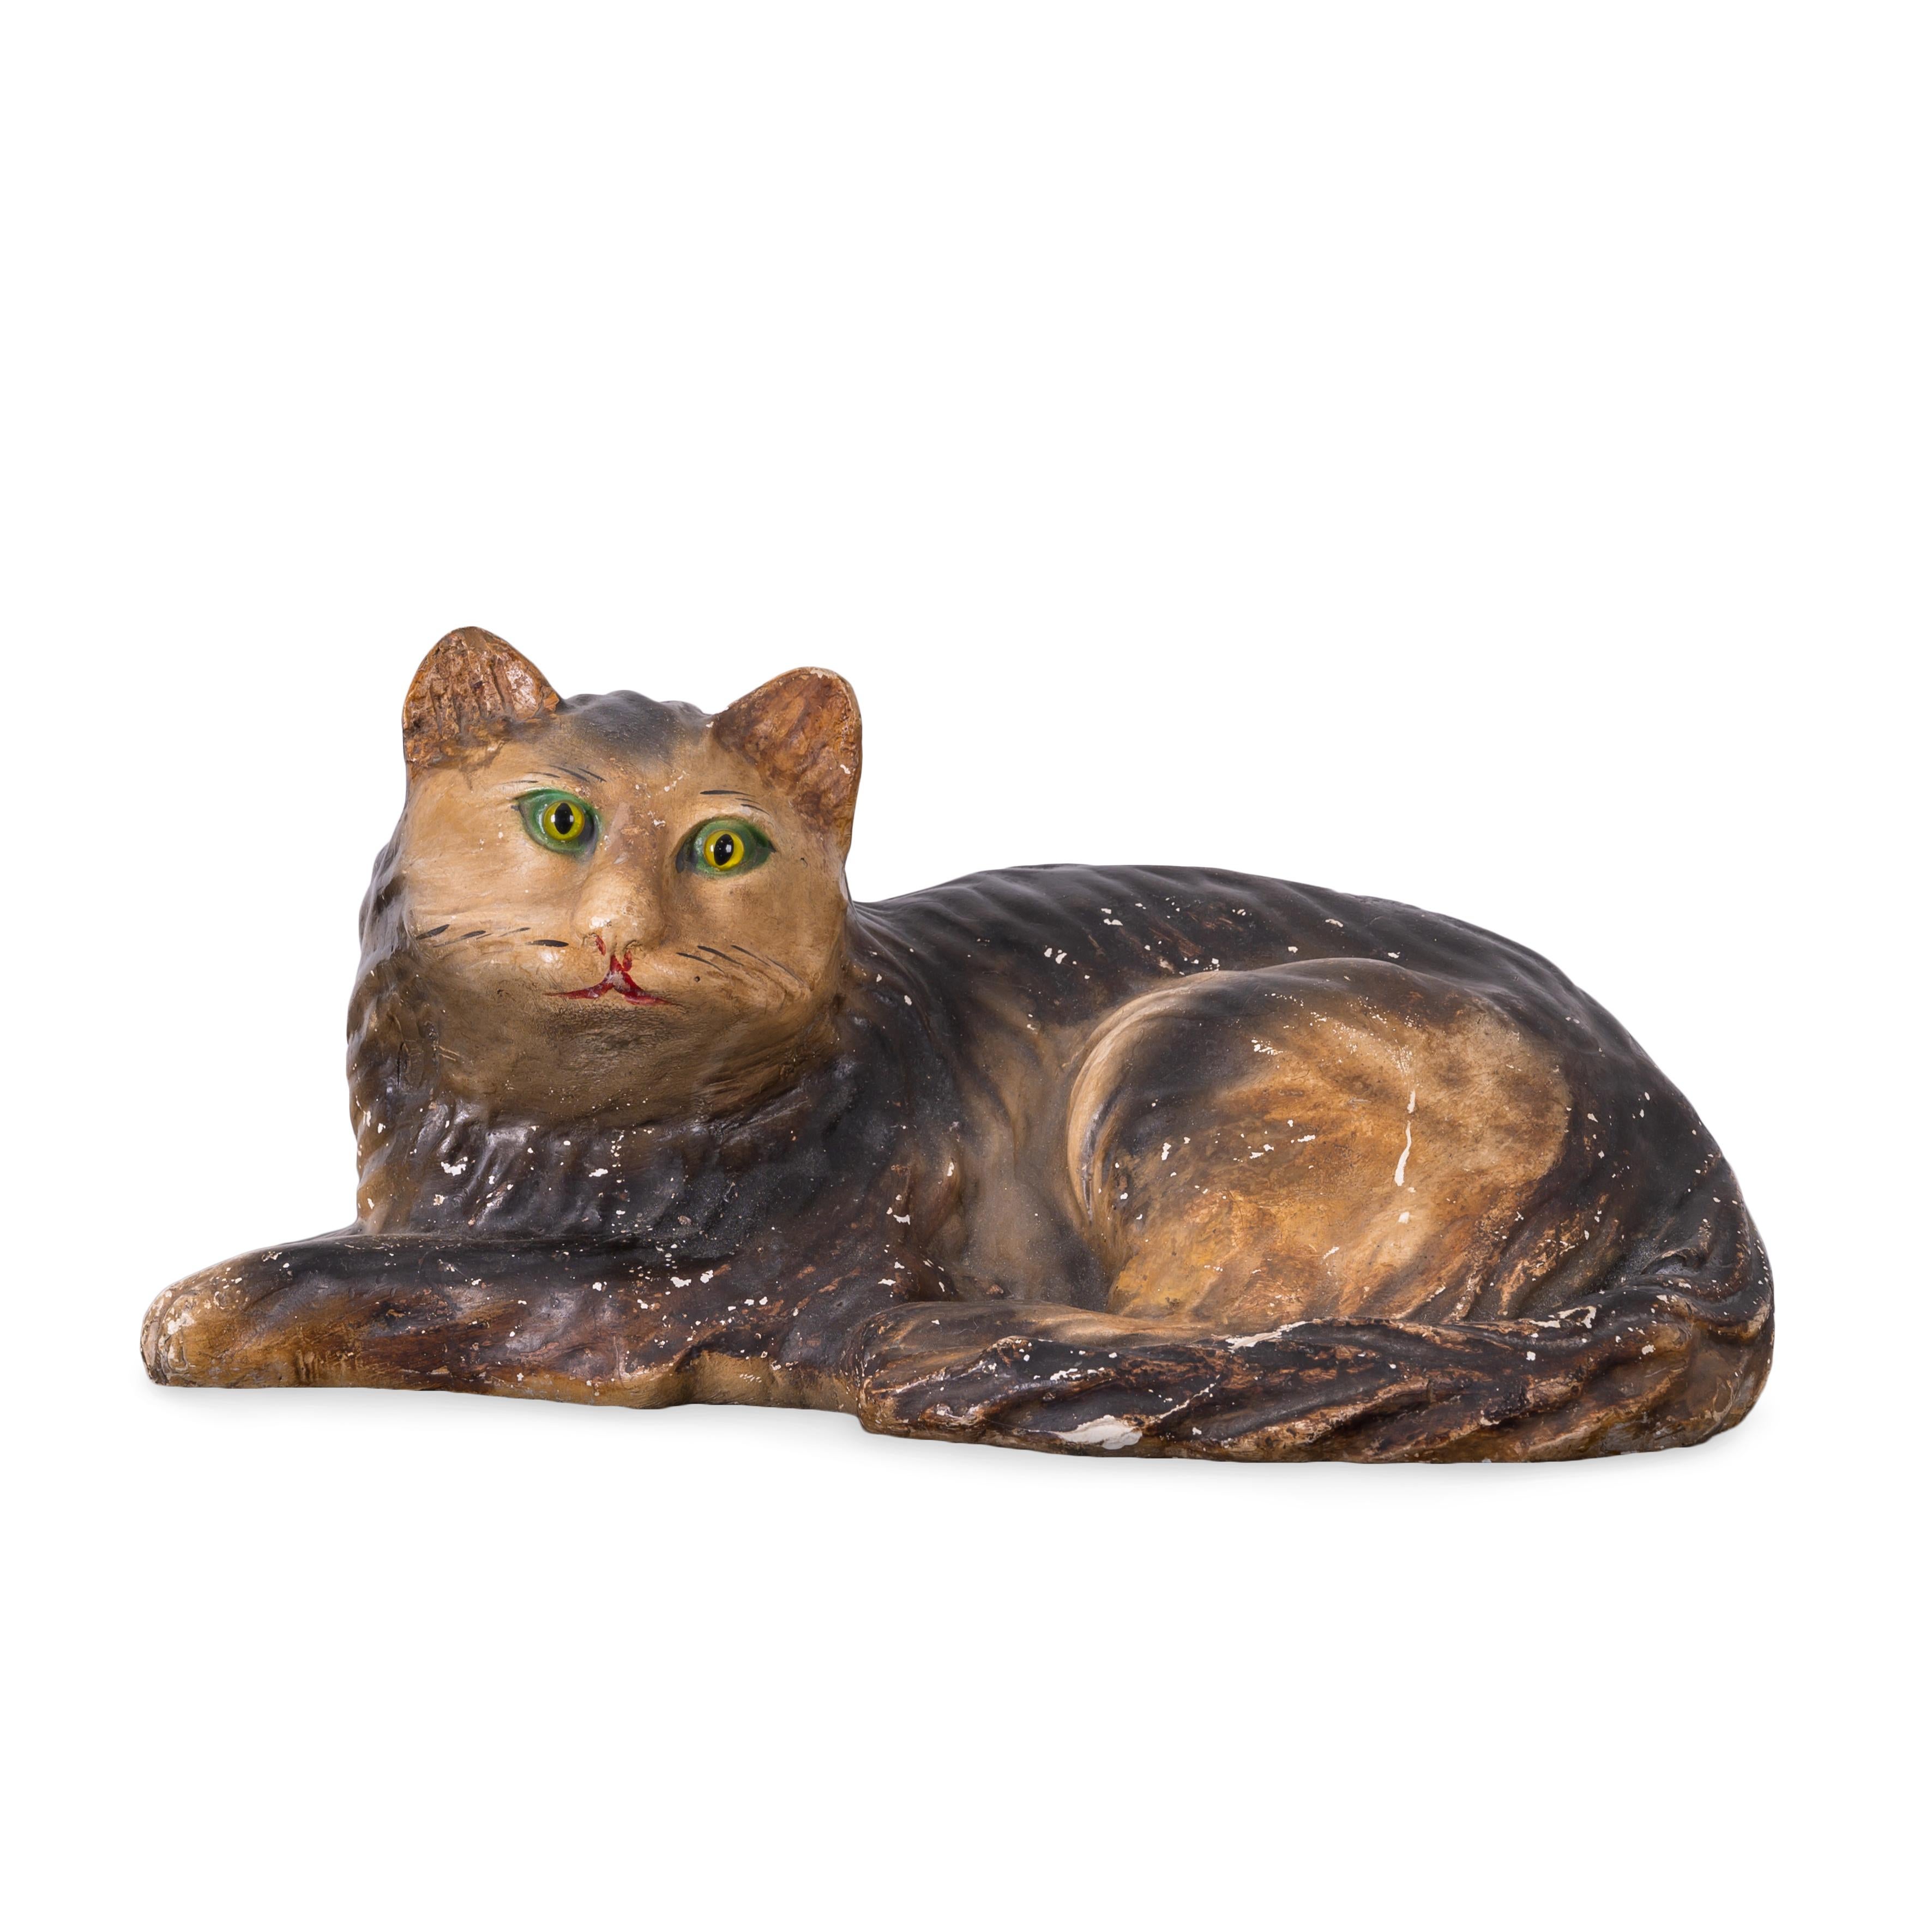 A Pennsylvania painted chalkware cat, circa second half 19th century.

These pieces usually painted by German-American folk artisans from Lancaster to Philadelphia were made to be a more accessible household ornament than expensive Staffordshire